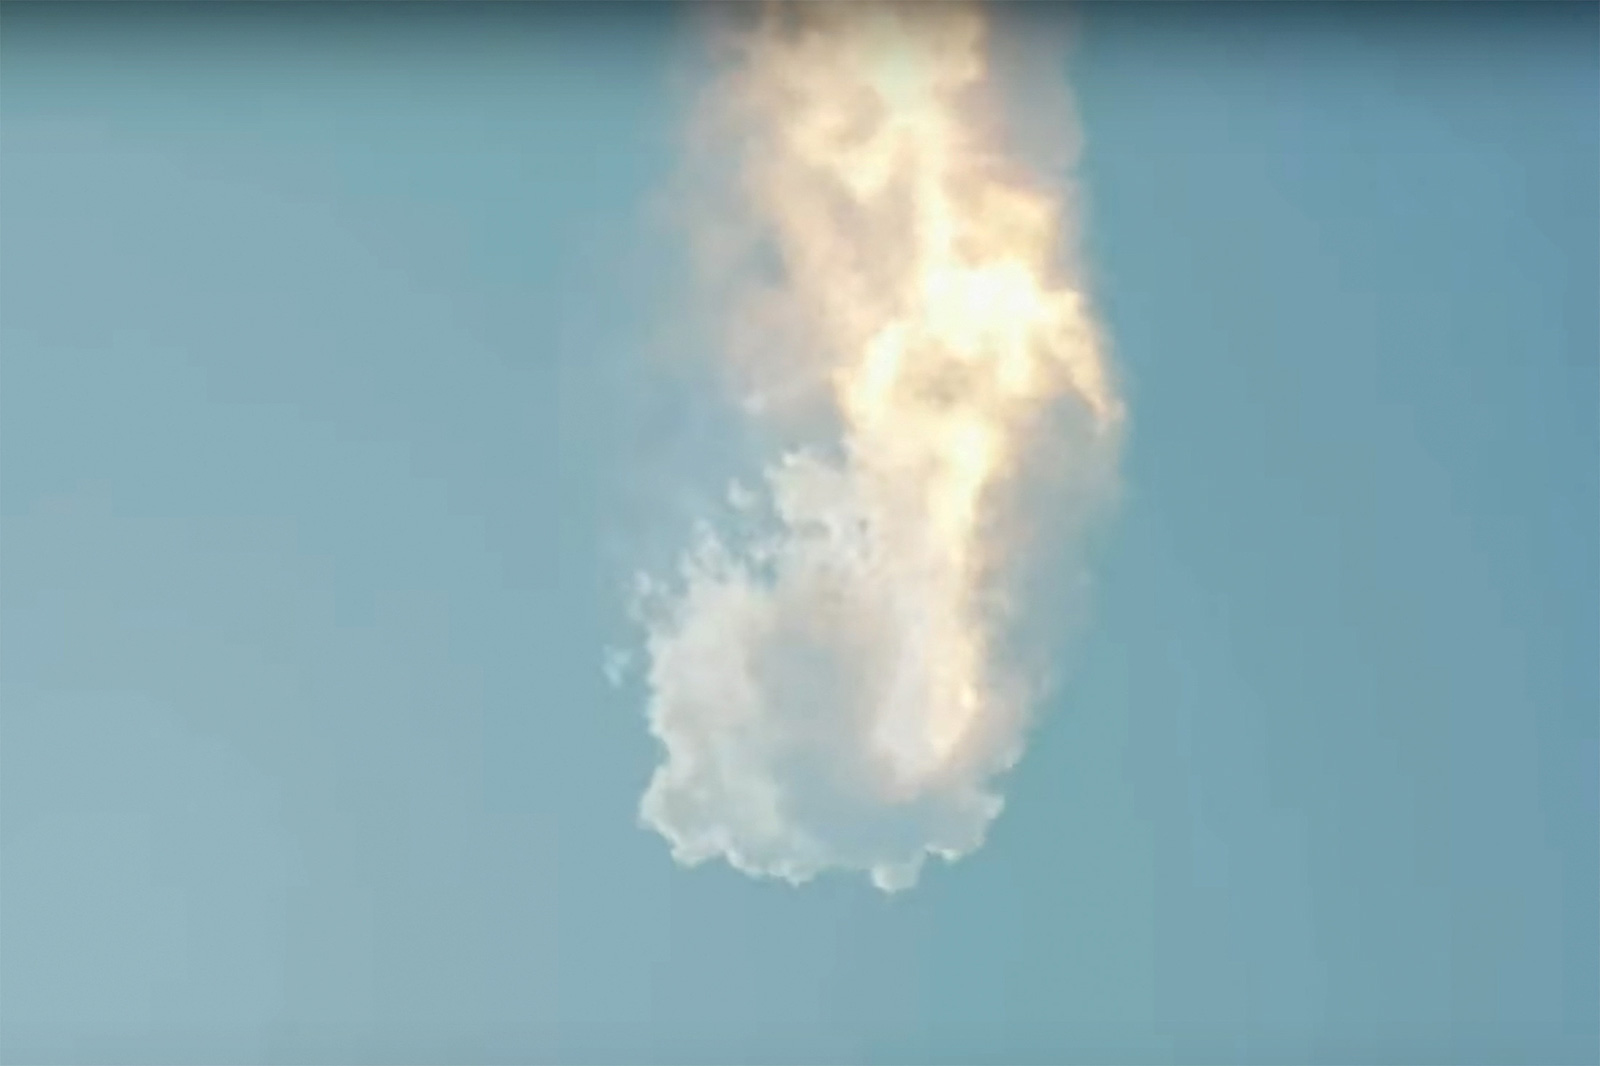 SpaceX’s Starship explodes in mid-air on its maiden flight